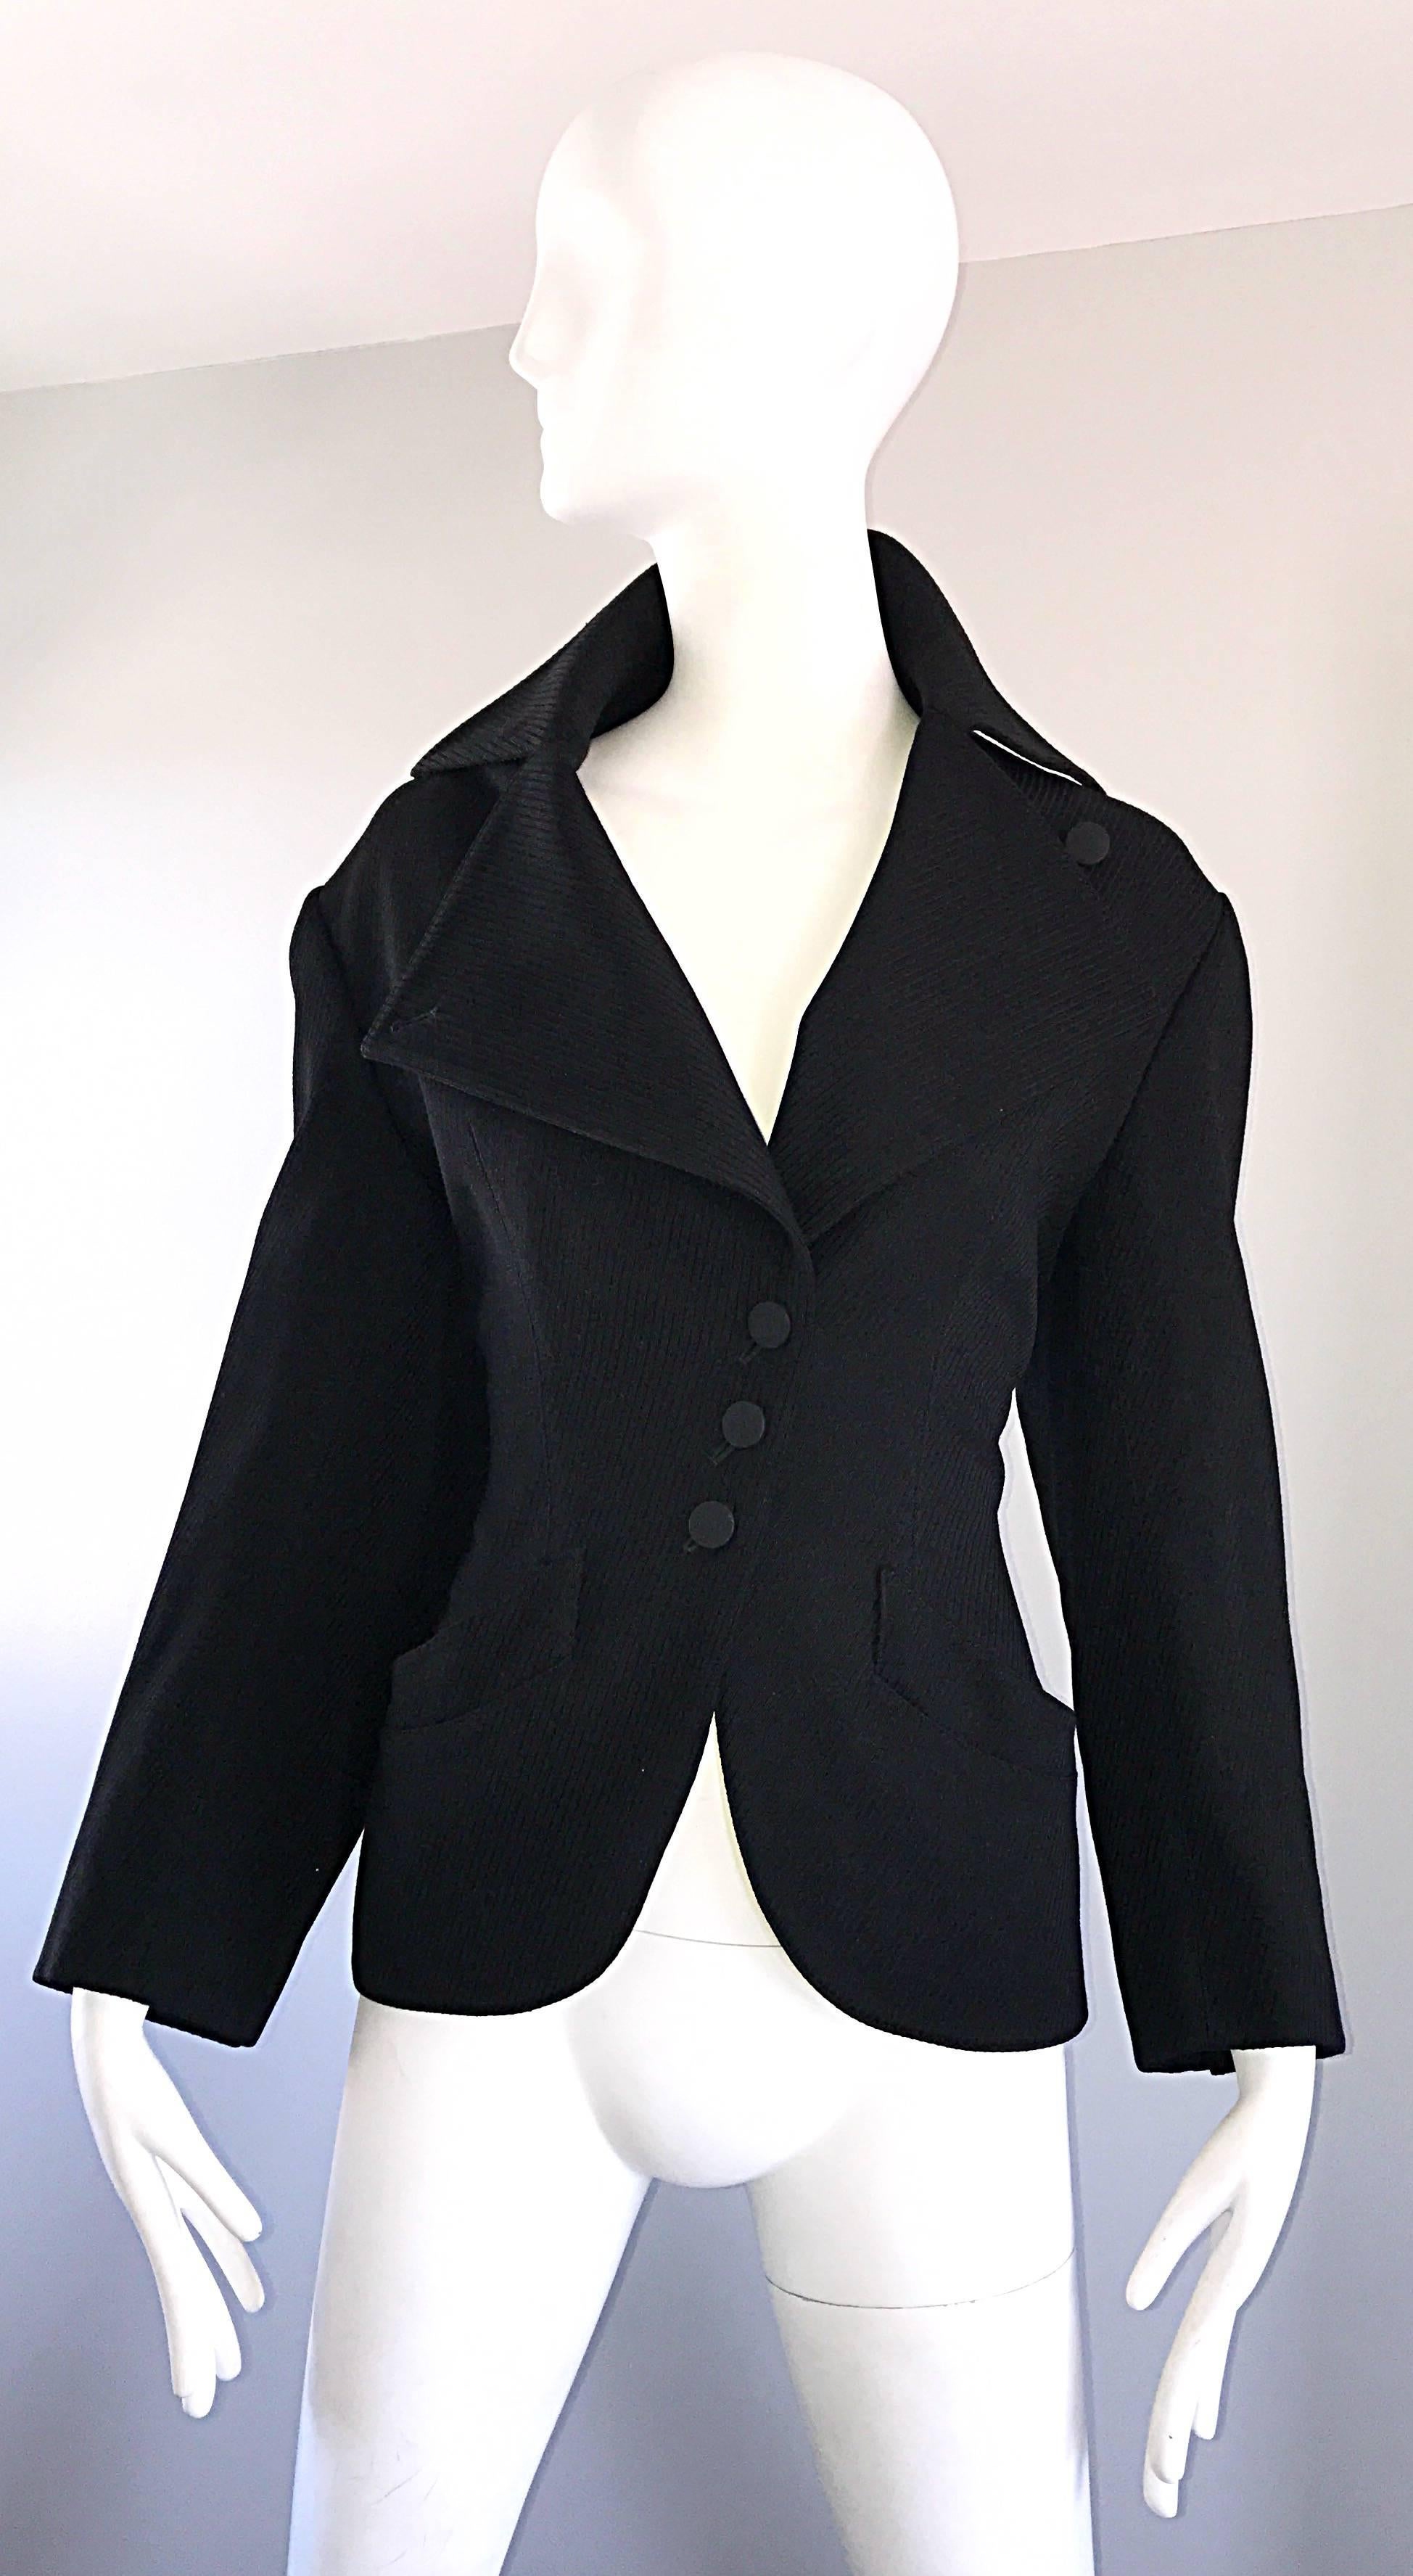 Rare Vintage Alaia 1980s Musuem Held Avant Garde Wasp Waist 80s Fitted Jacket For Sale 3